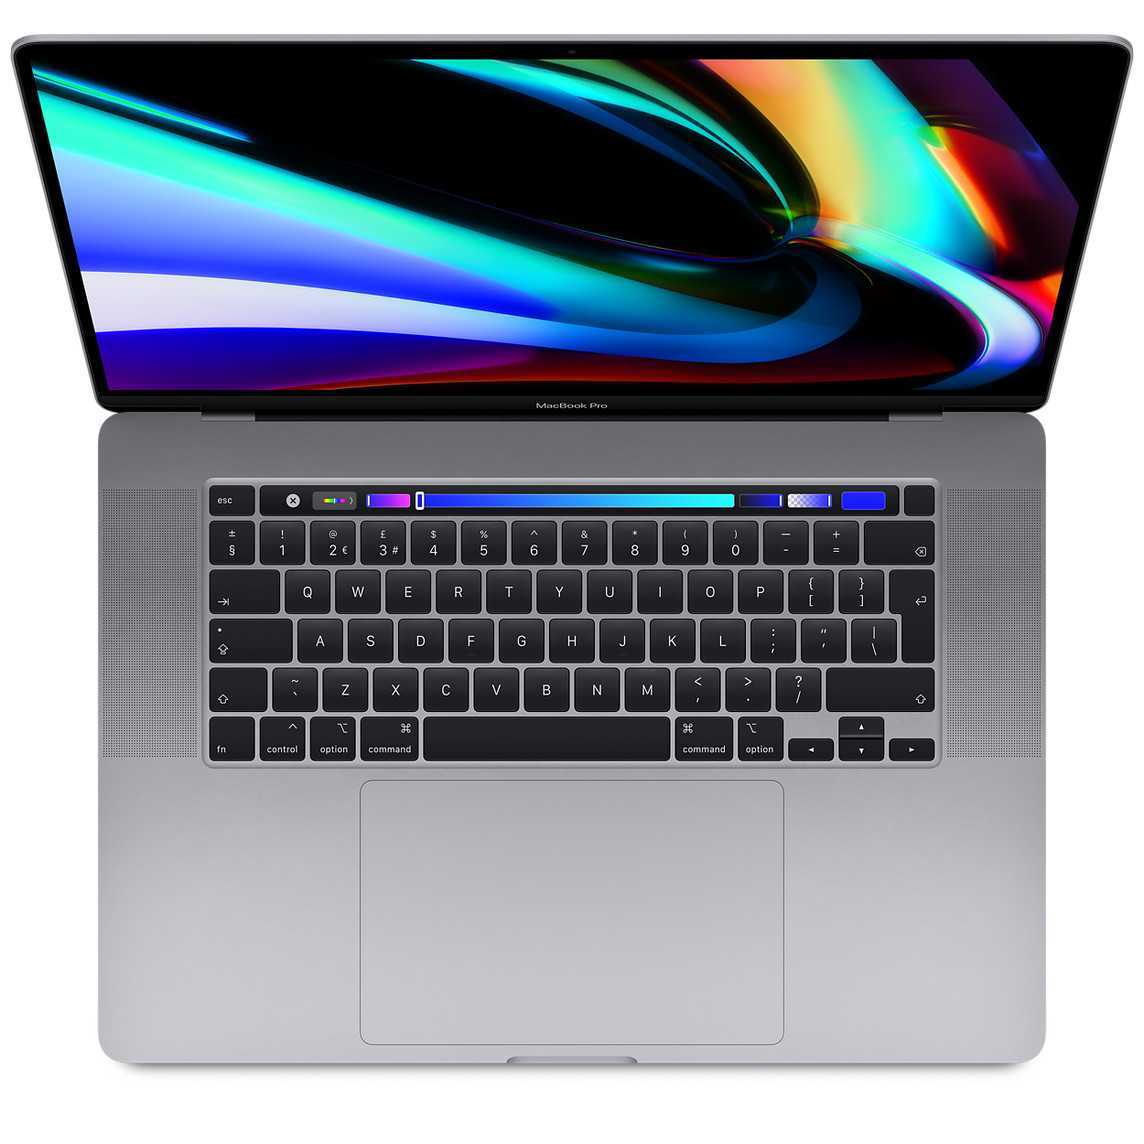 HIGH END MACBOOK PRO 16INCHES COREi9 64GB RAMS 8GB GRAPHICS WITH SOFTWARES-pic_1